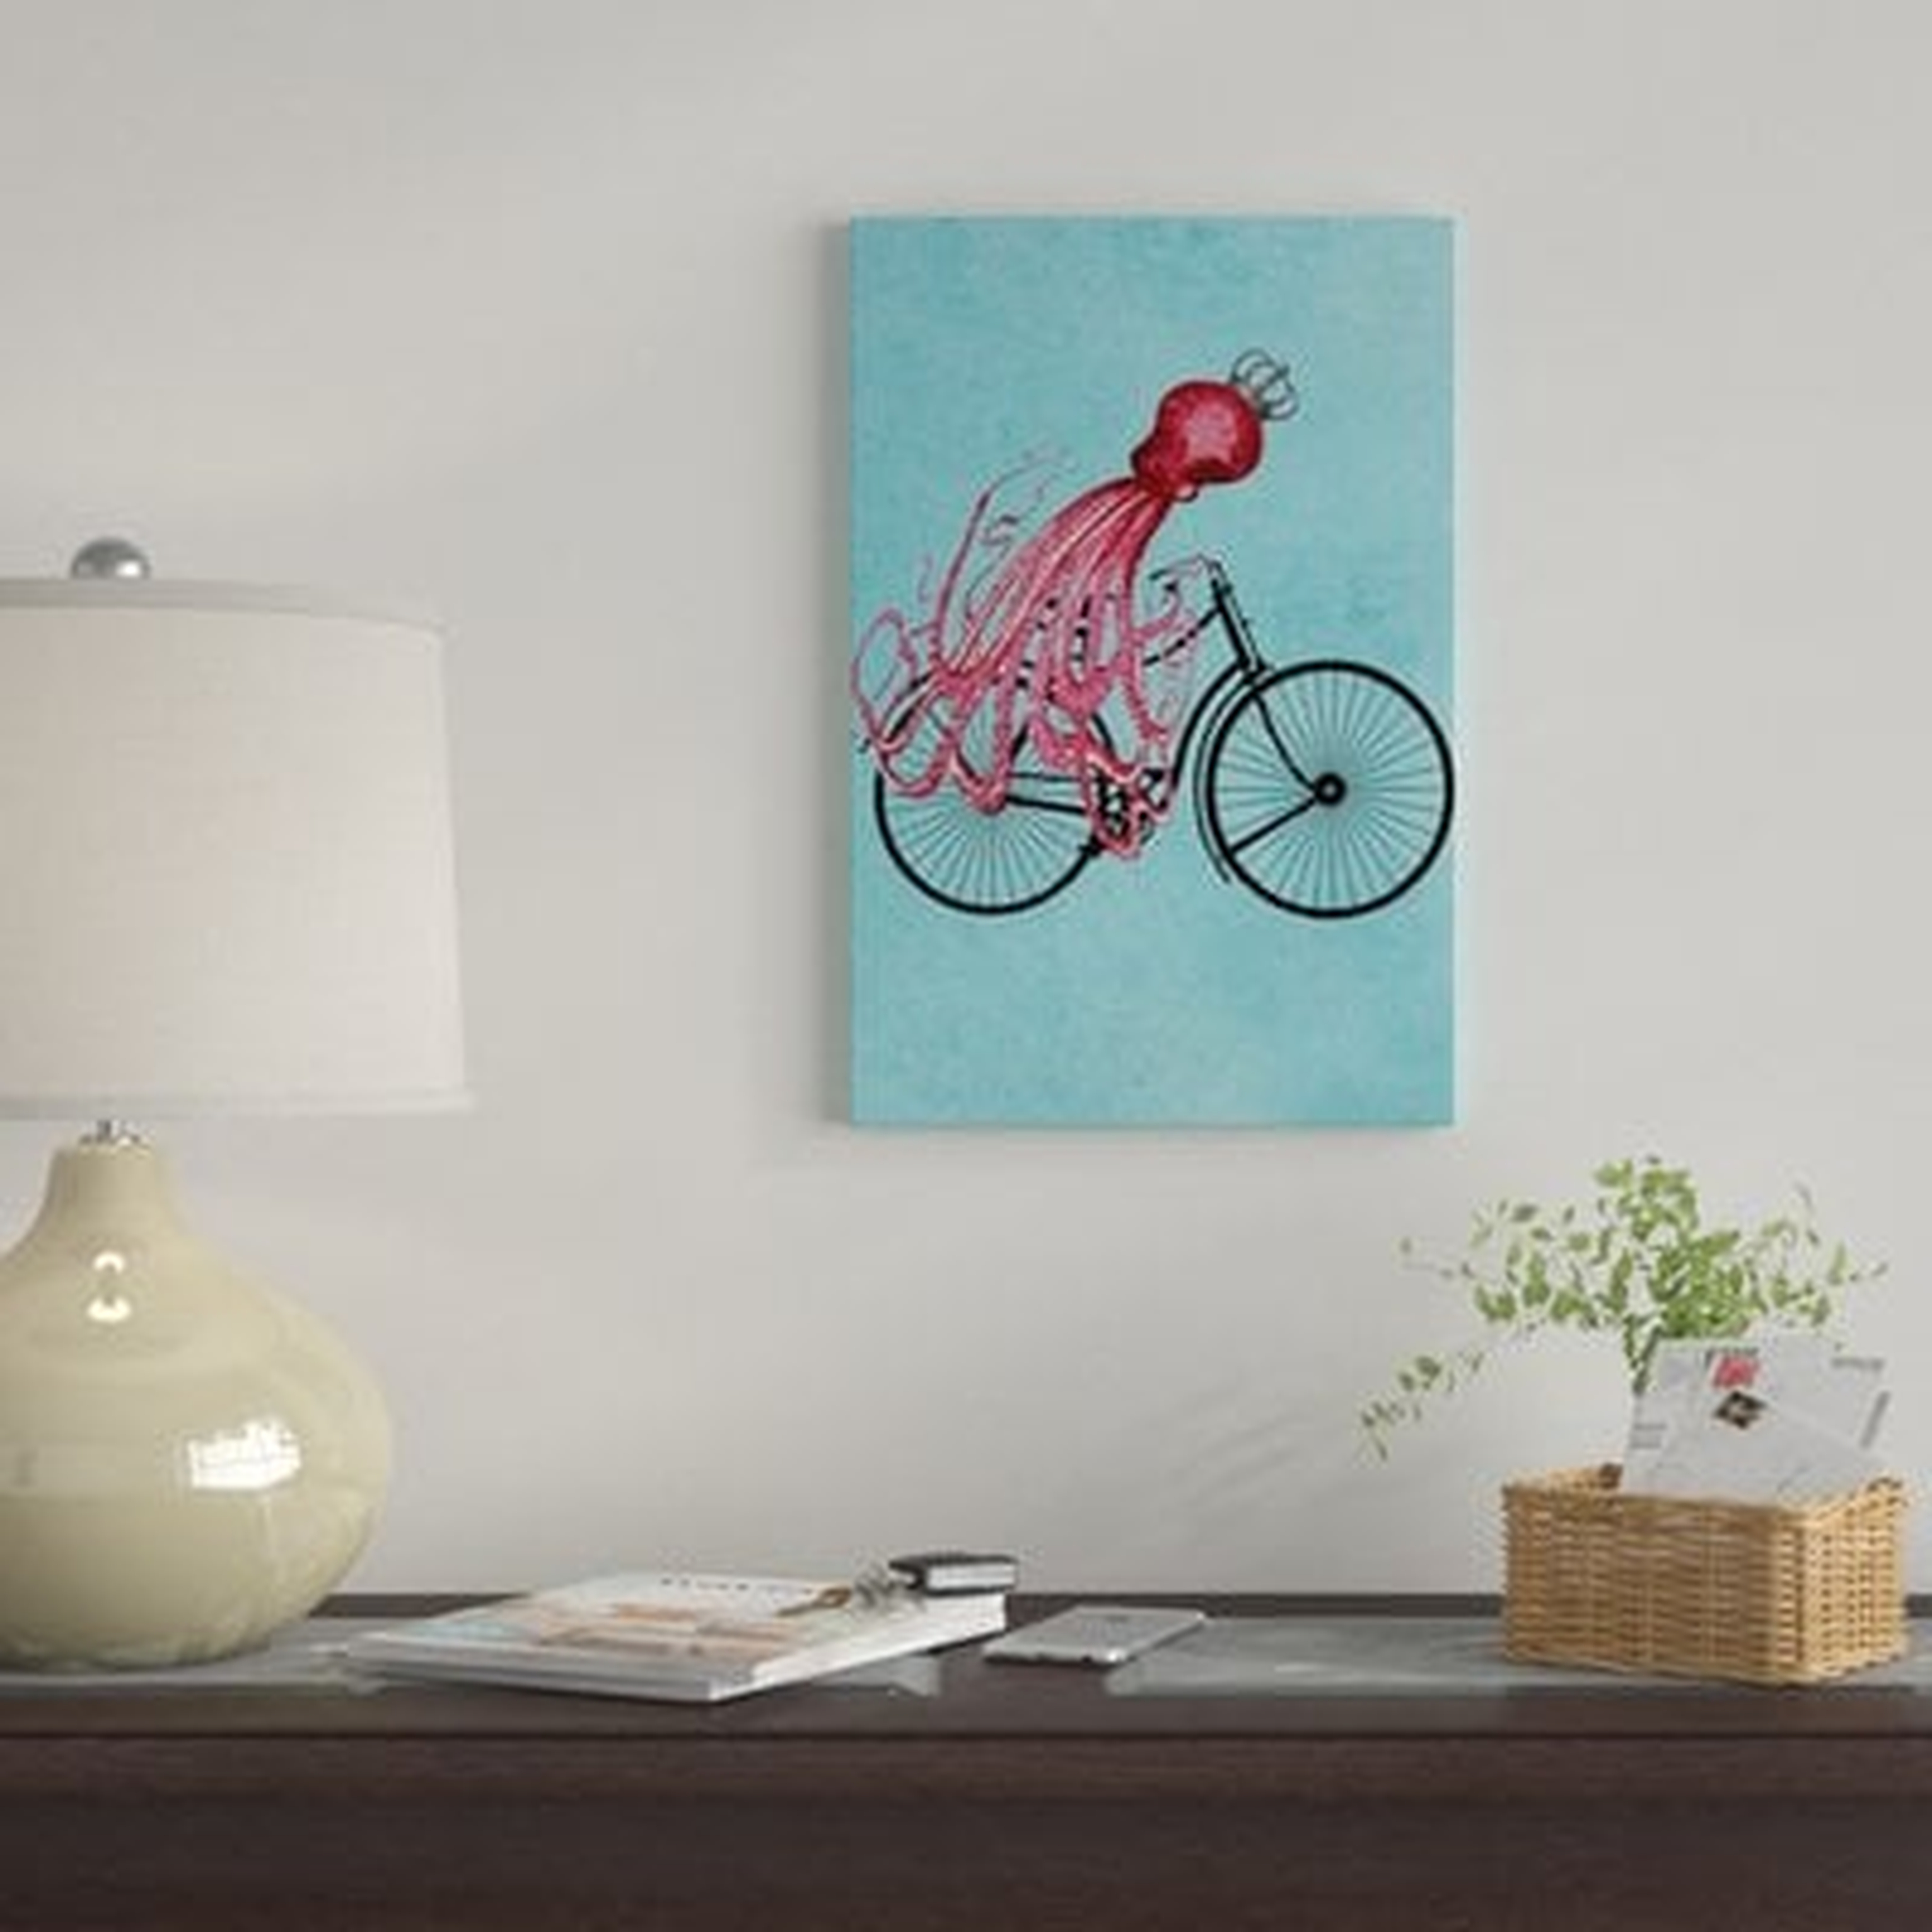 'Octopus On Bicycle' By  Coco de Paris Graphic Art Print on Wrapped Canvas - Wayfair